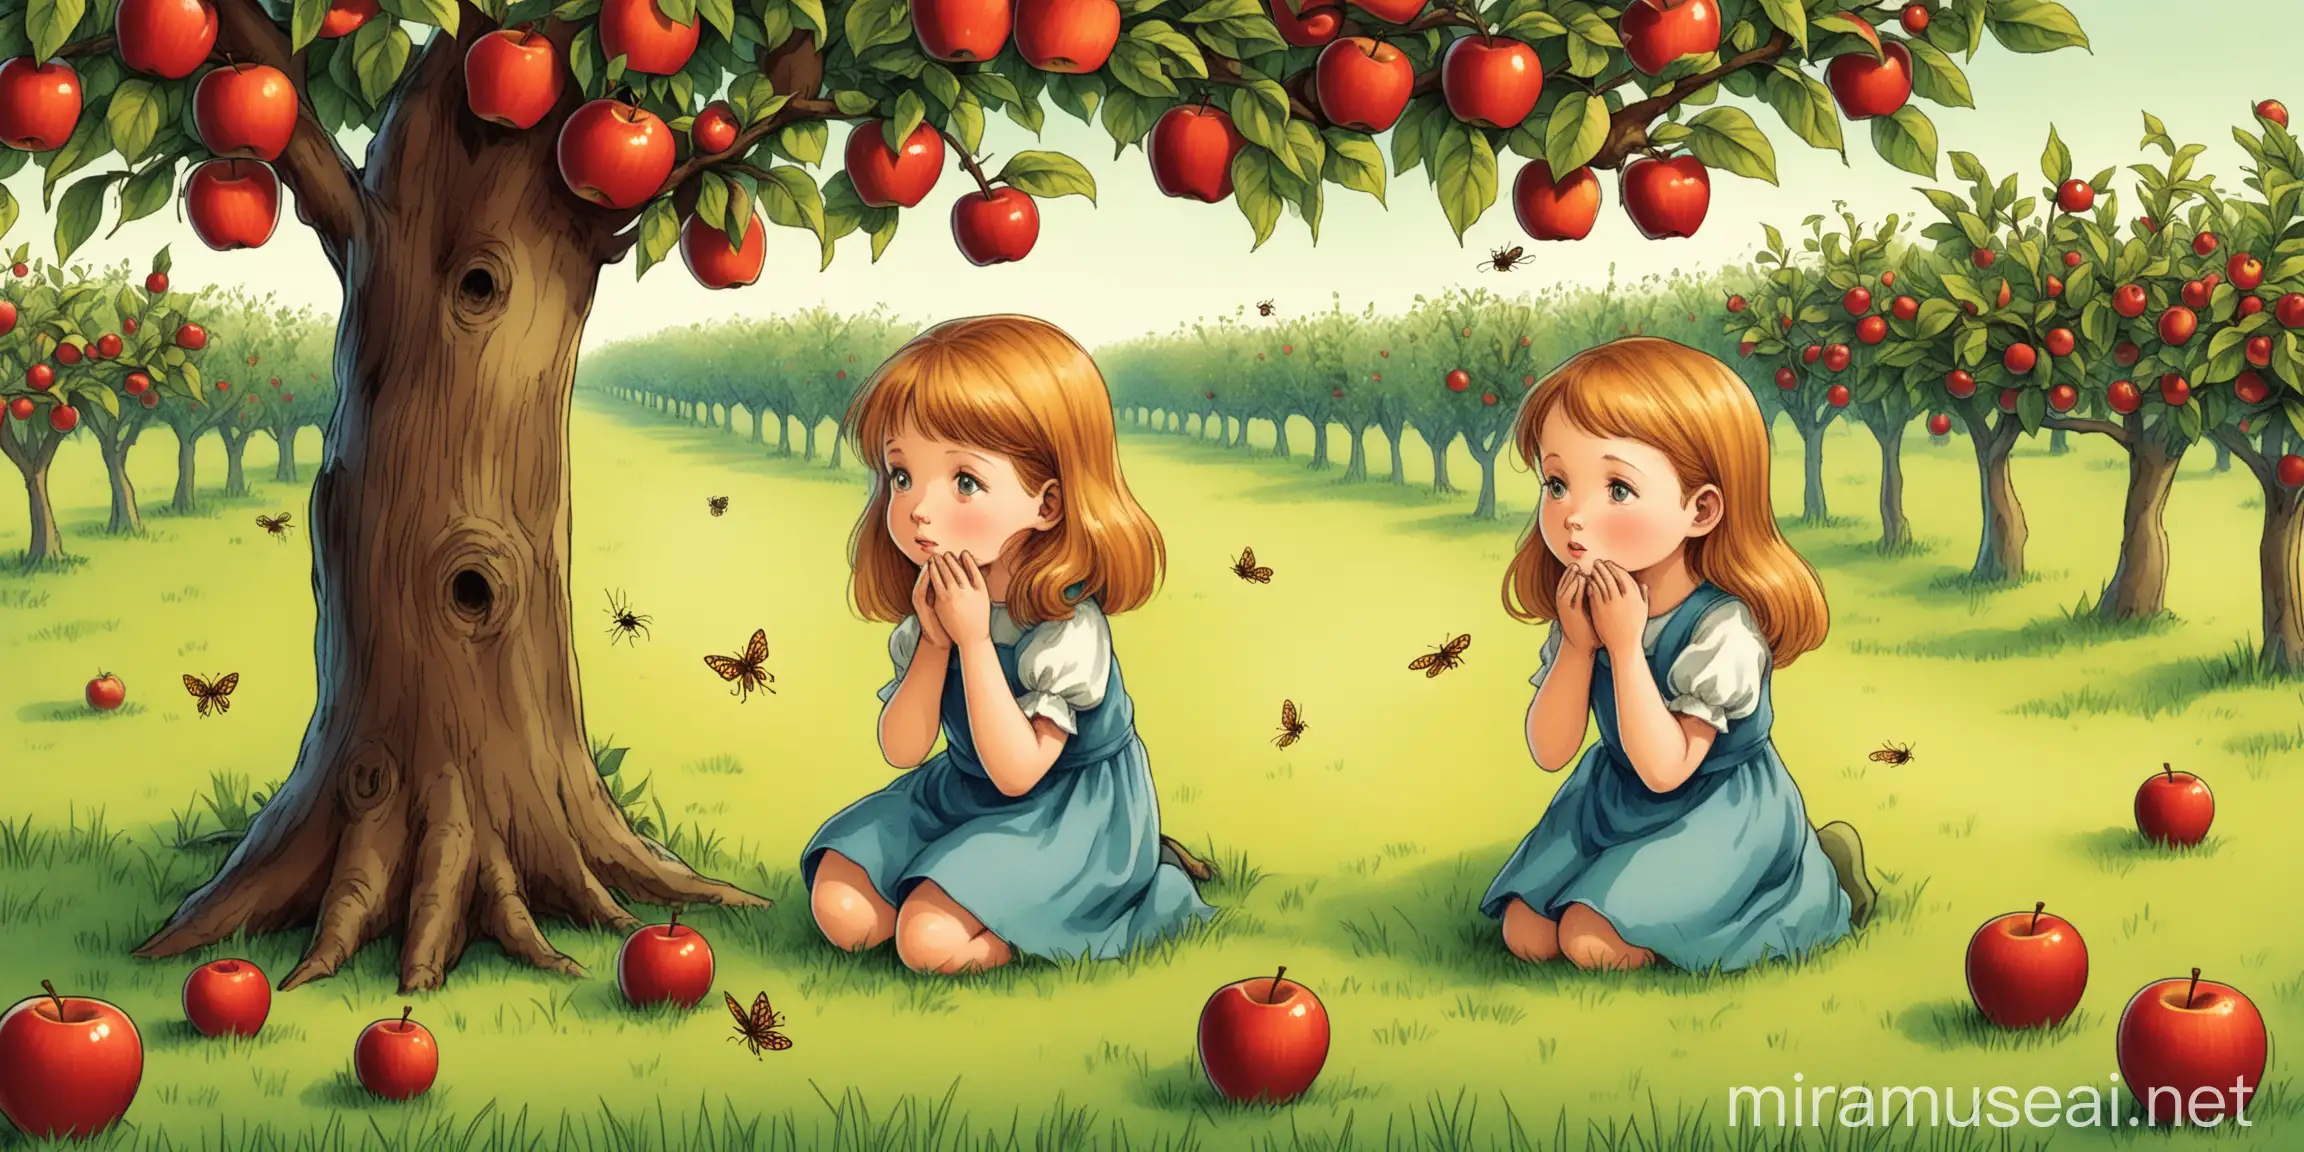 Girl Listening to Orchard Insect Song amidst Apple Trees